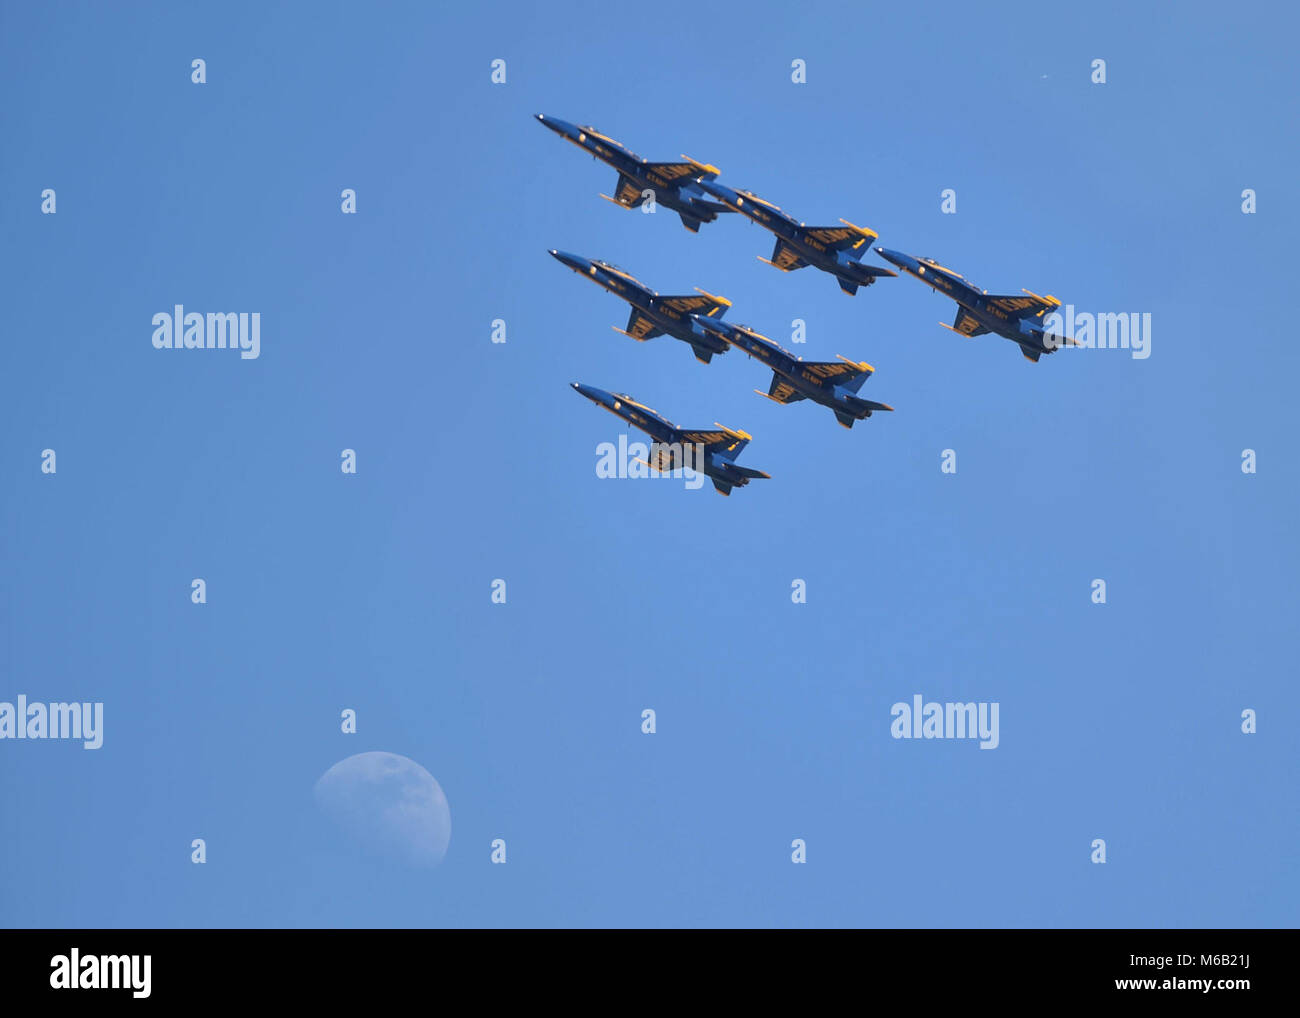 EL CENTRO, Calif. (Feb. 24, 2018) The Blue Angels fly in their signature Delta formation during a practice demonstration. The Blue Angels are scheduled to perform more than 60 demonstrations at more than 30 locations across the U.S. in 2018. (U.S. Navy Stock Photo